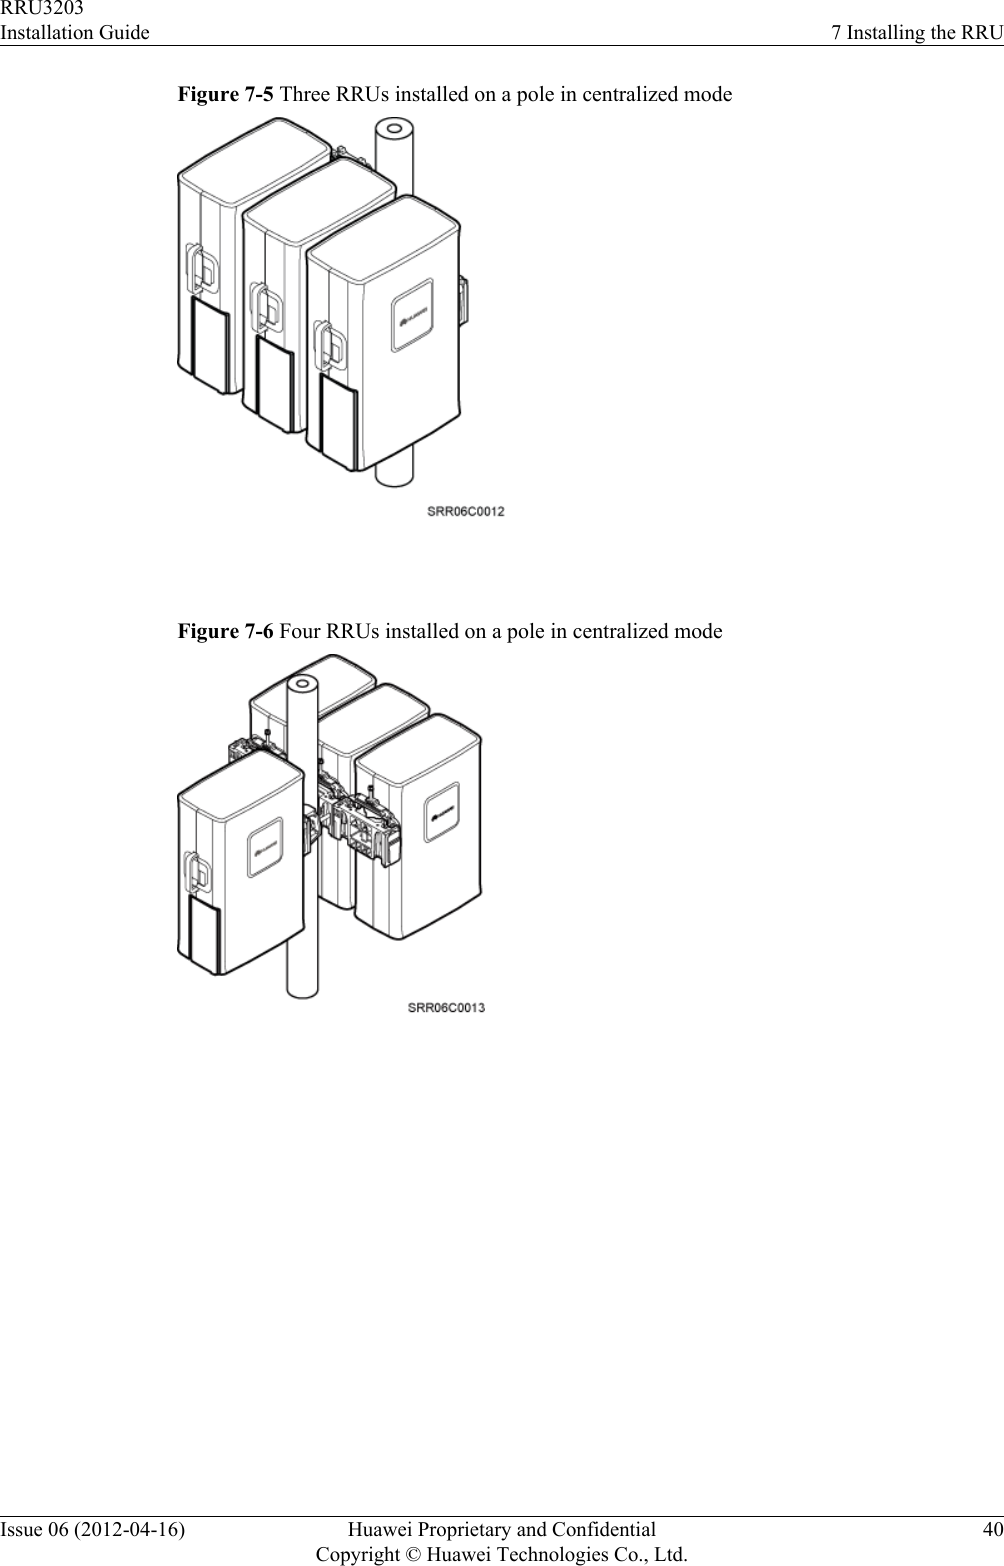 Figure 7-5 Three RRUs installed on a pole in centralized mode Figure 7-6 Four RRUs installed on a pole in centralized mode RRU3203Installation Guide 7 Installing the RRUIssue 06 (2012-04-16) Huawei Proprietary and ConfidentialCopyright © Huawei Technologies Co., Ltd.40